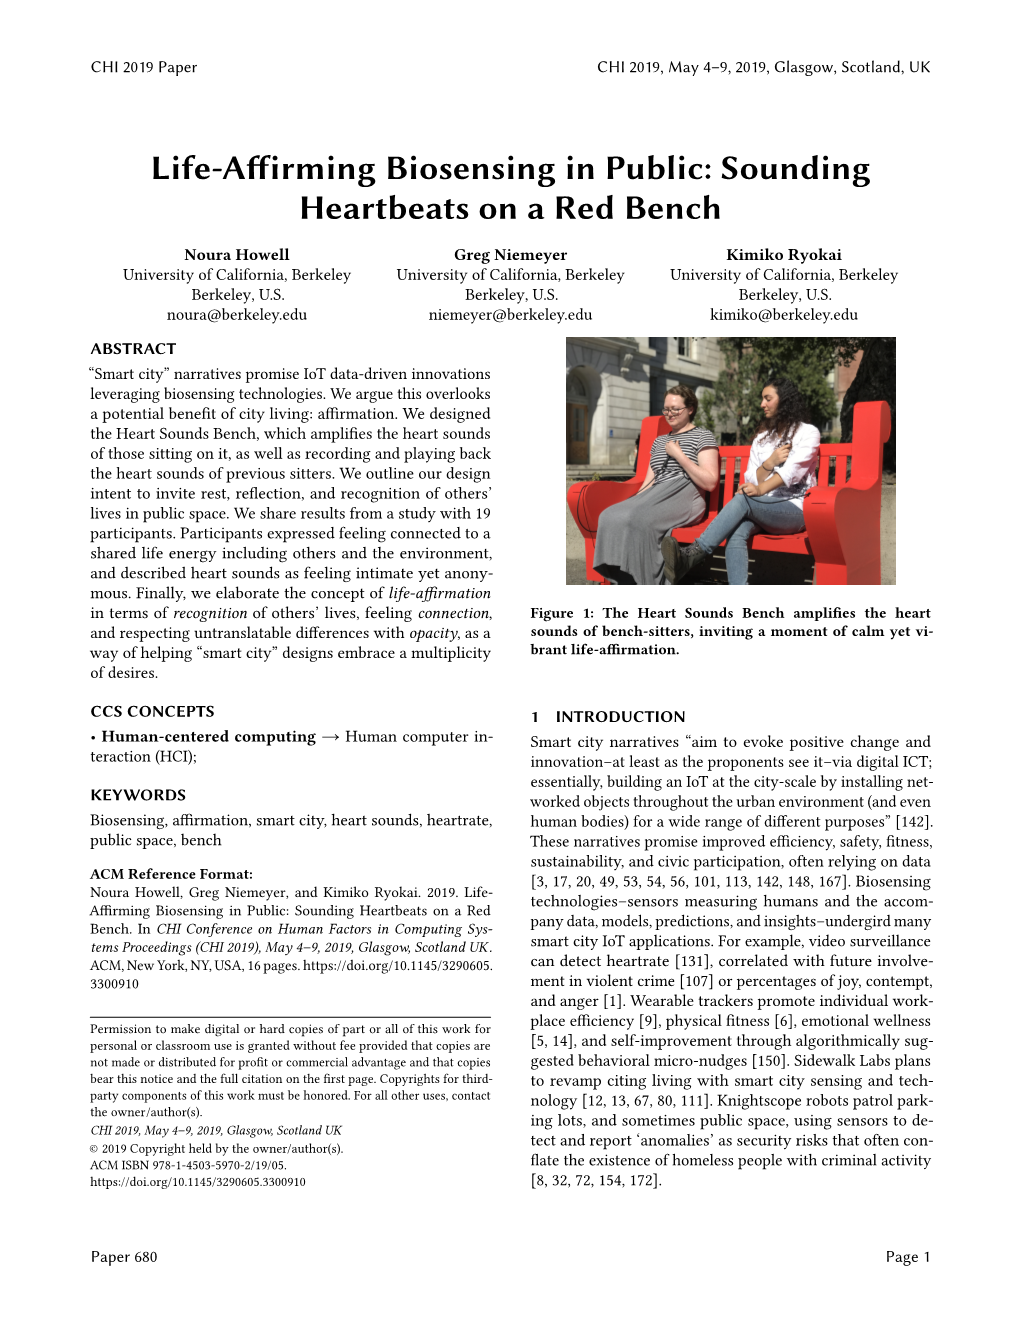 Life-Affirming Biosensing in Public: Sounding Heartbeats on a Red Bench